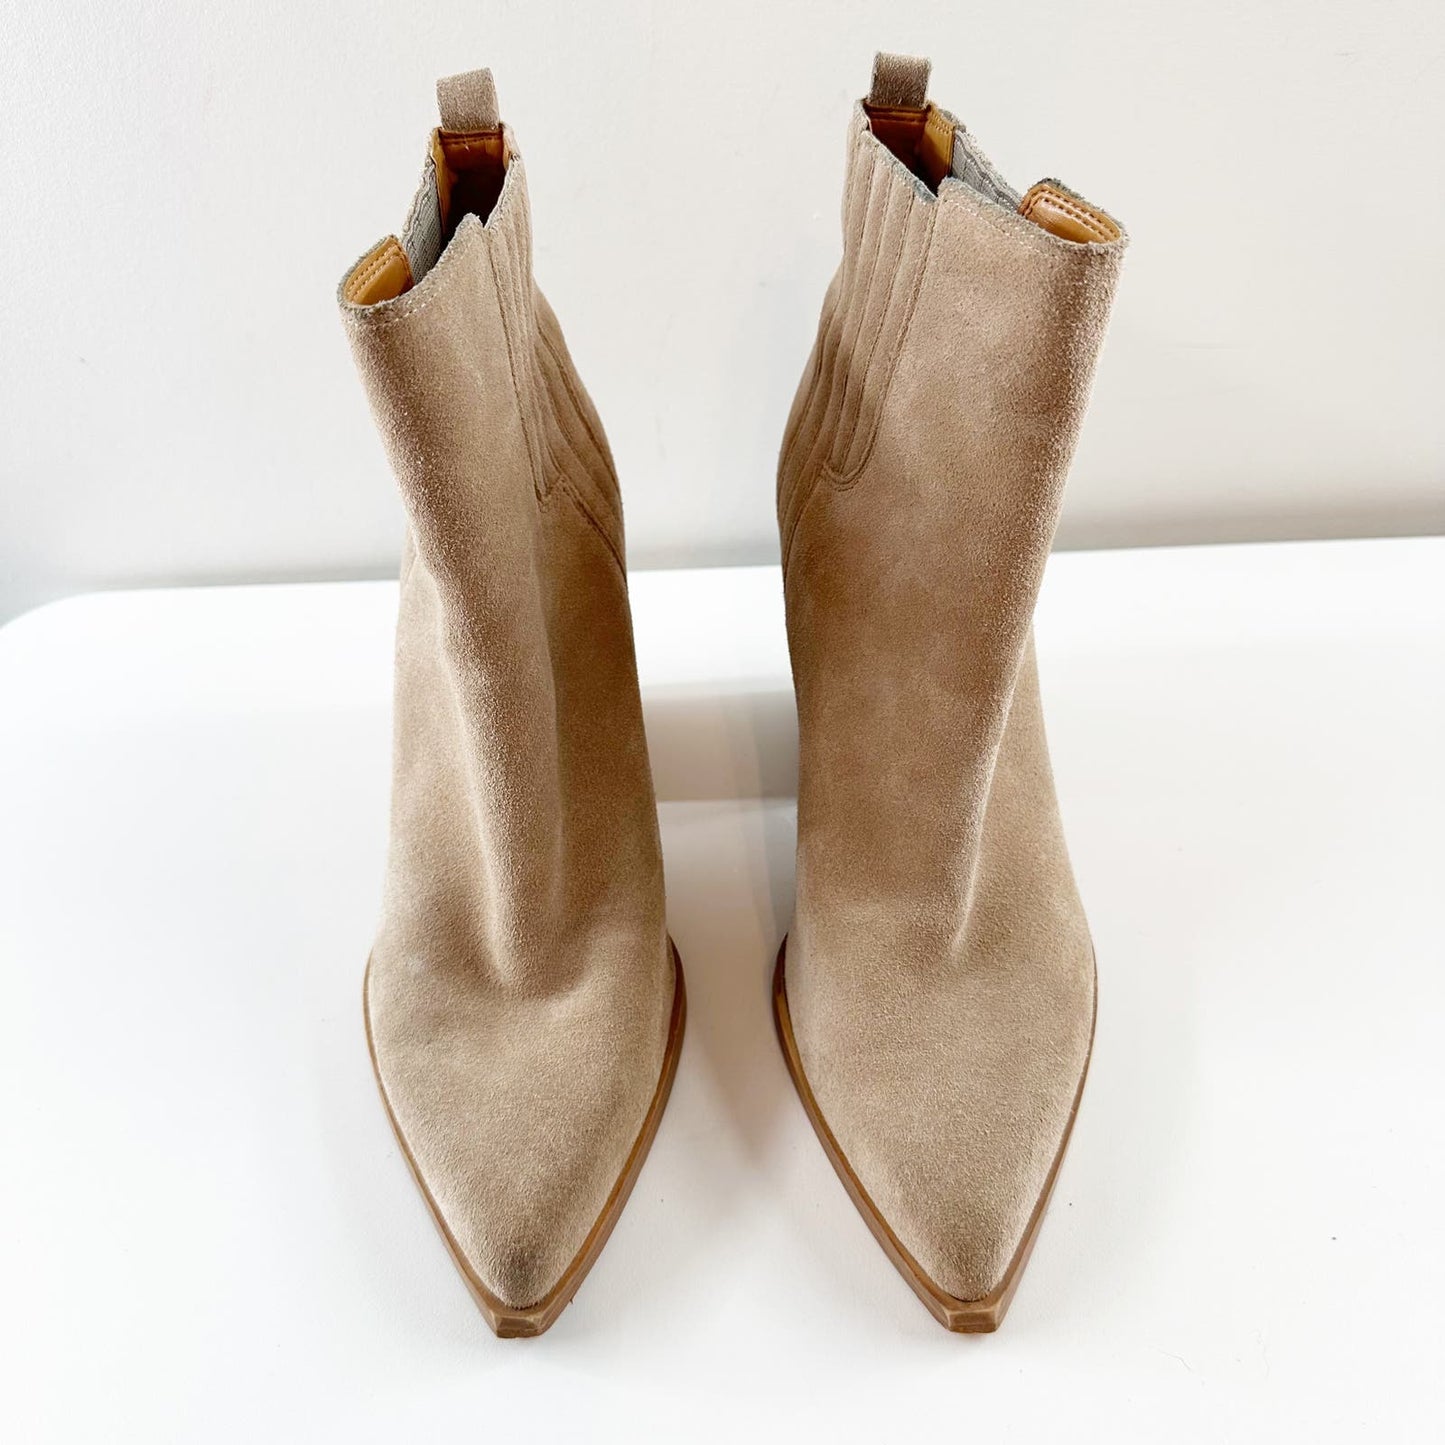 Marc Fisher Mloshay Leather Ankle Pull On Western Booties Boots Suede Tan 9